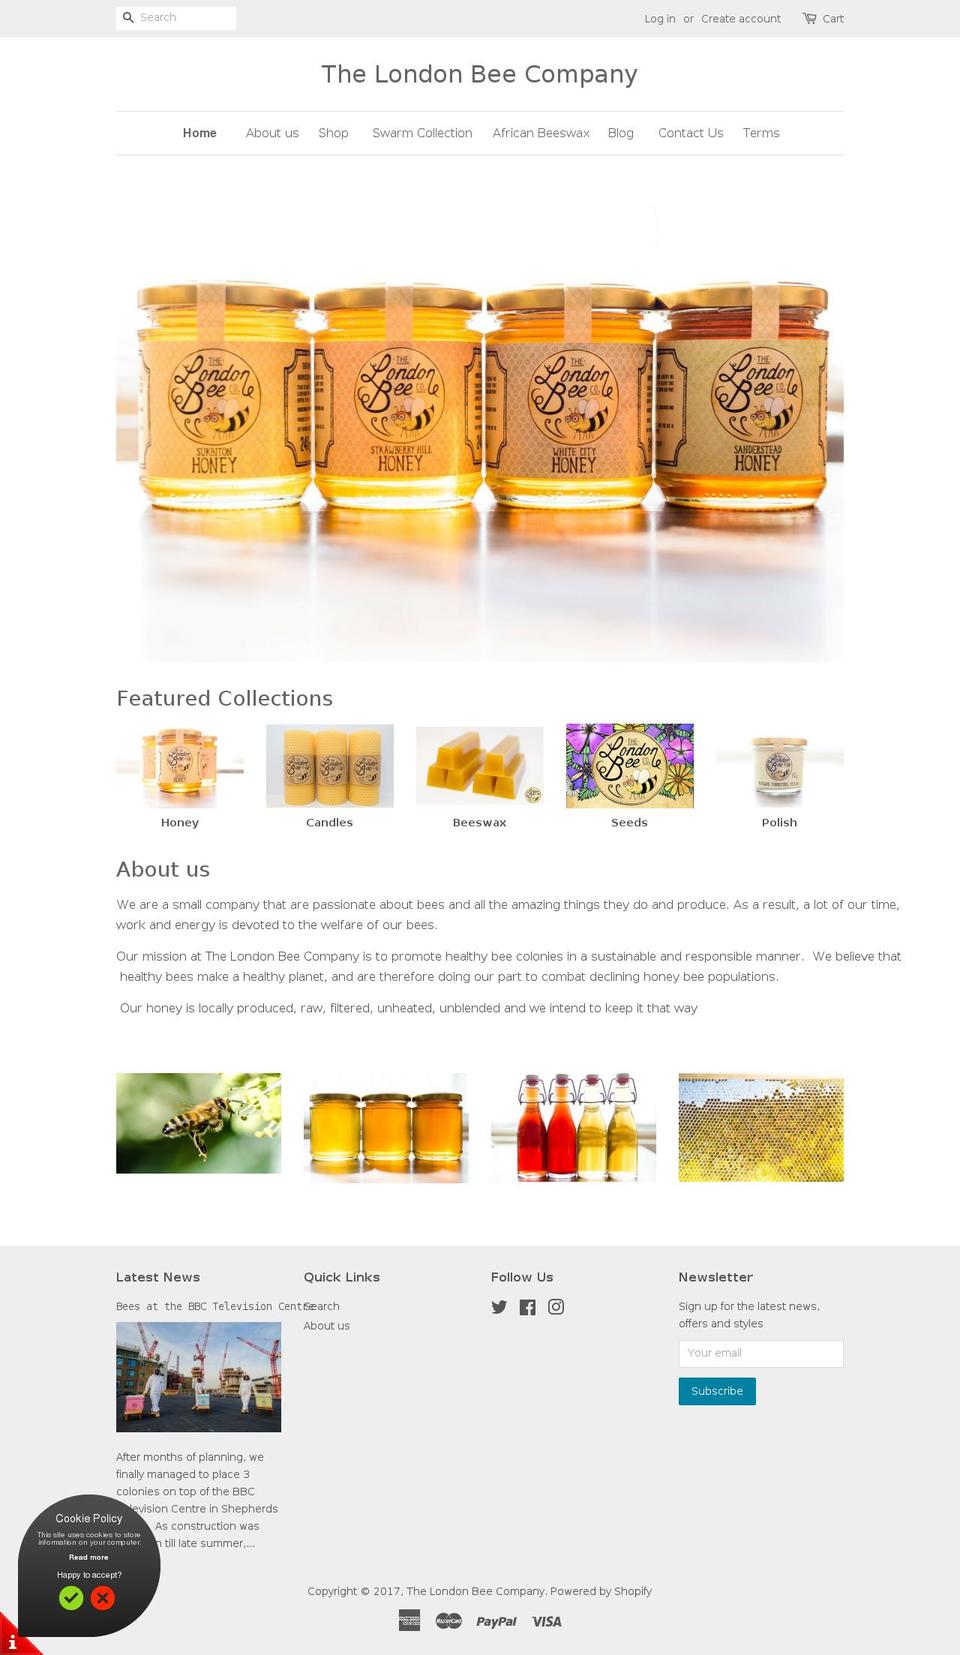 Mr Parker Shopify theme site example thelondonbeecompany.com